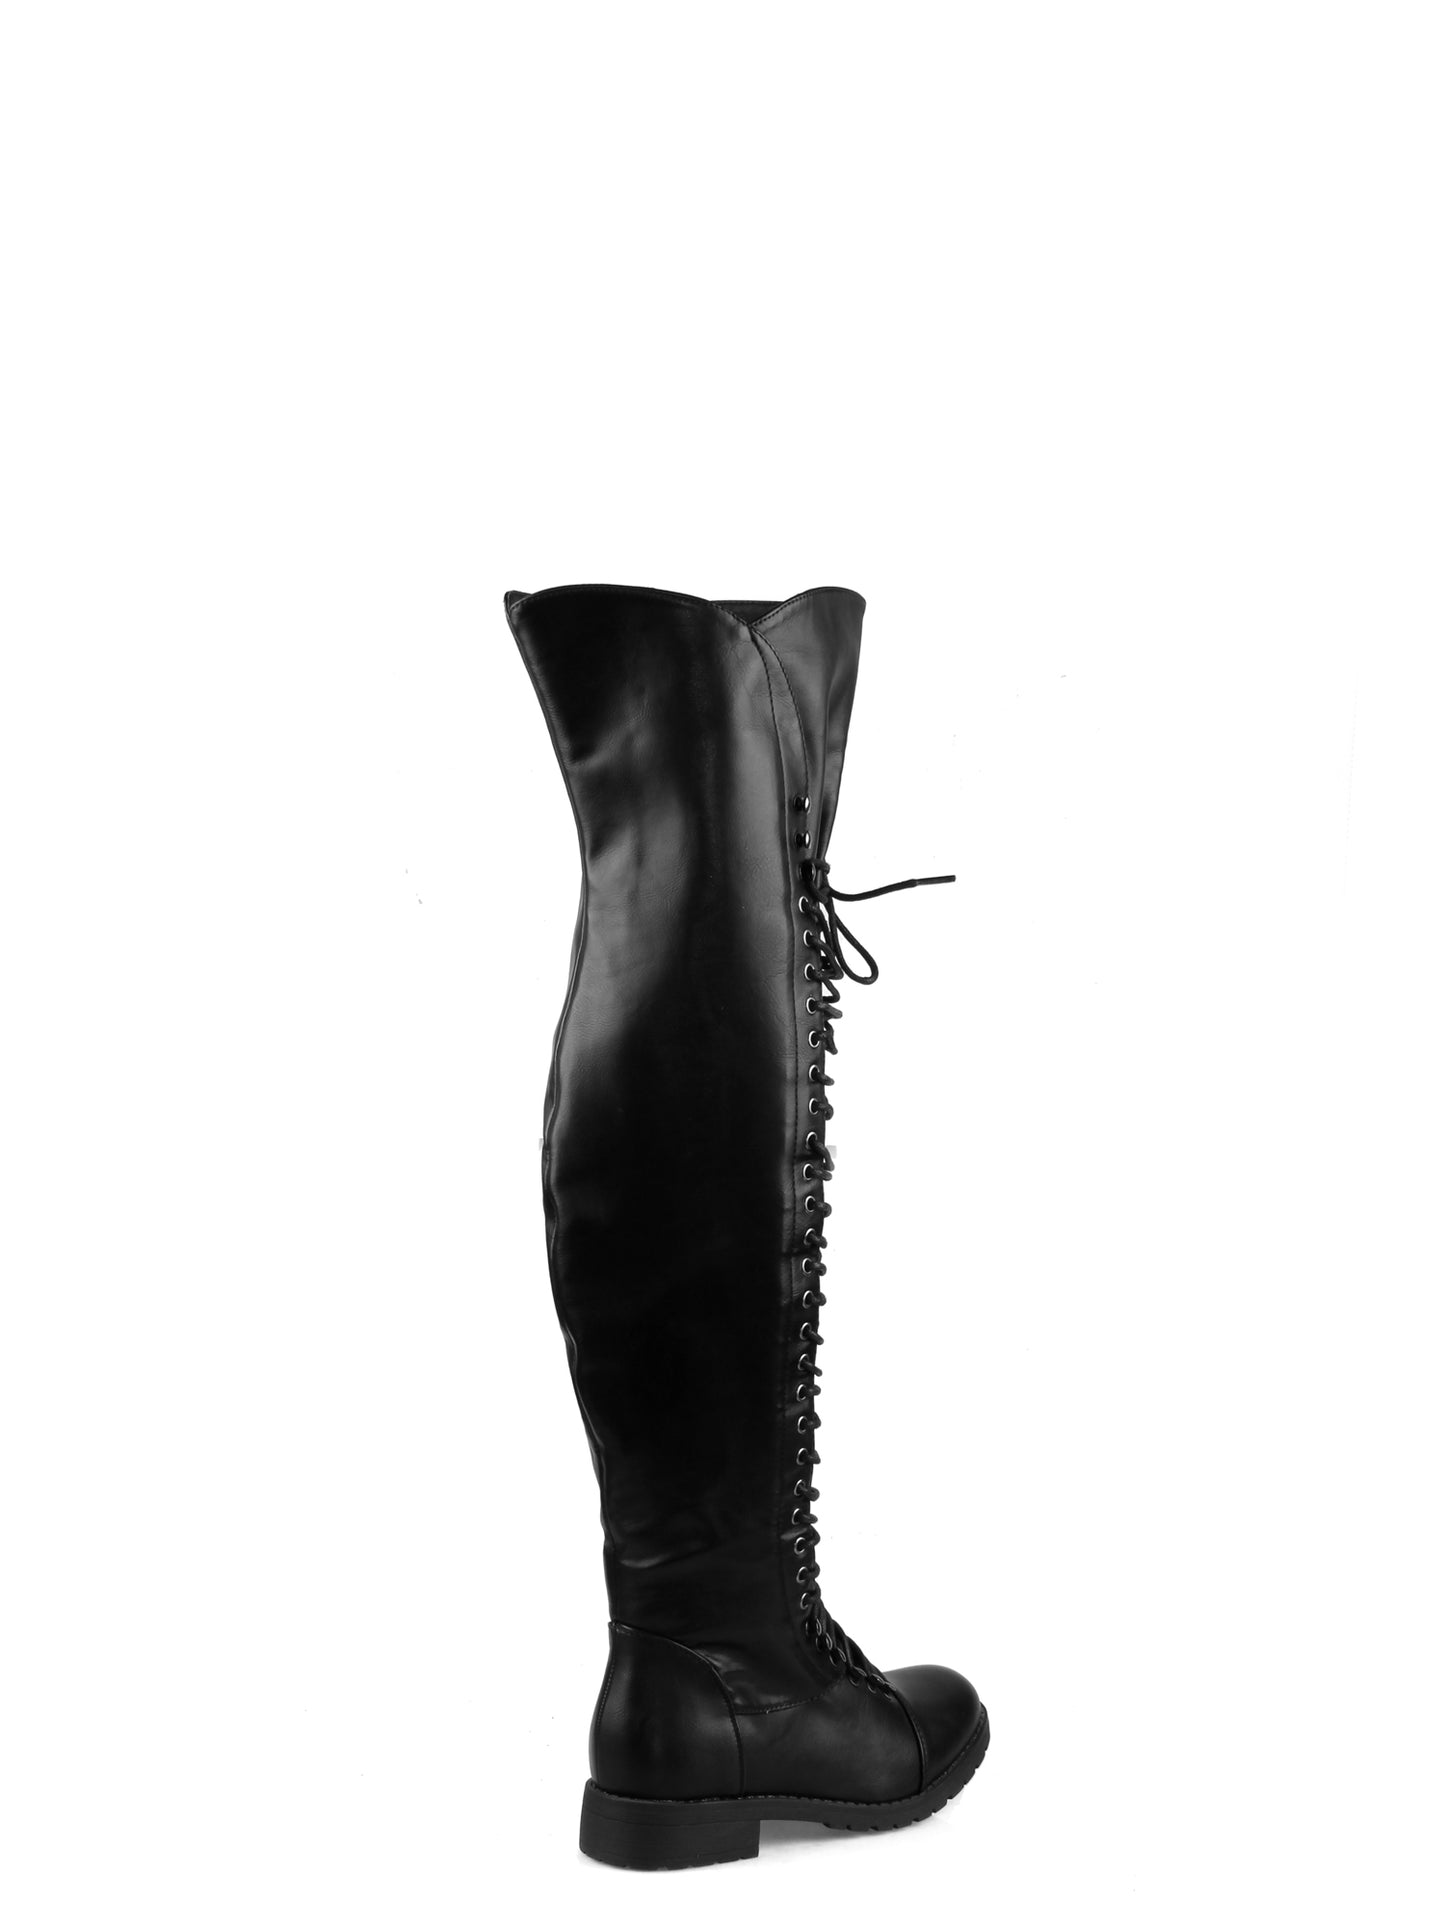 Laced Up Over the Knee Womens Riding Combat Boot in Black